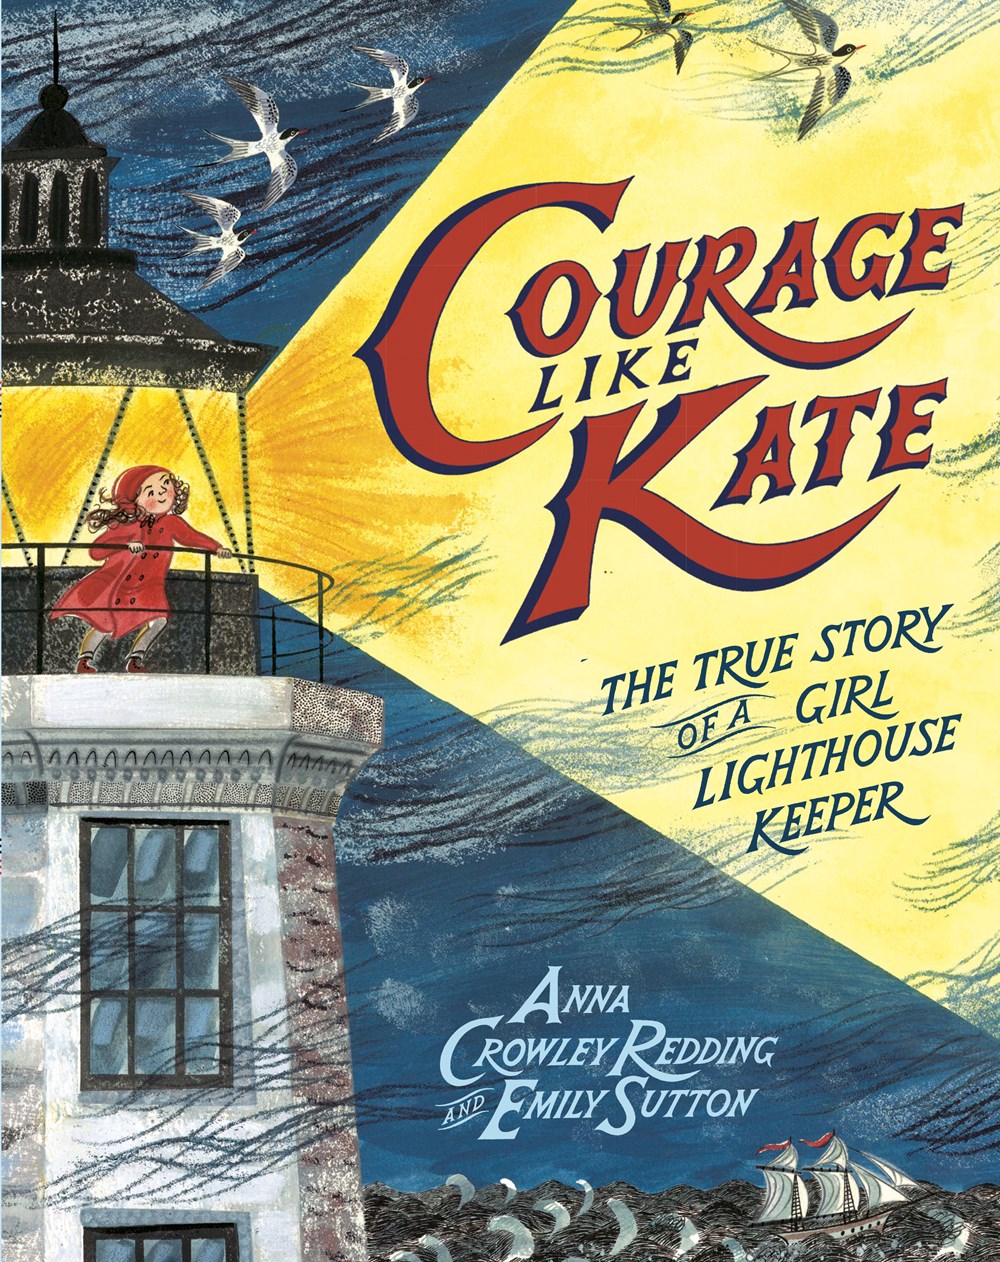 Giveaway: Courage Like Kate: The True Story of a Girl Lighthouse Keeper (Anna Crowley Redding) ~ US Only!